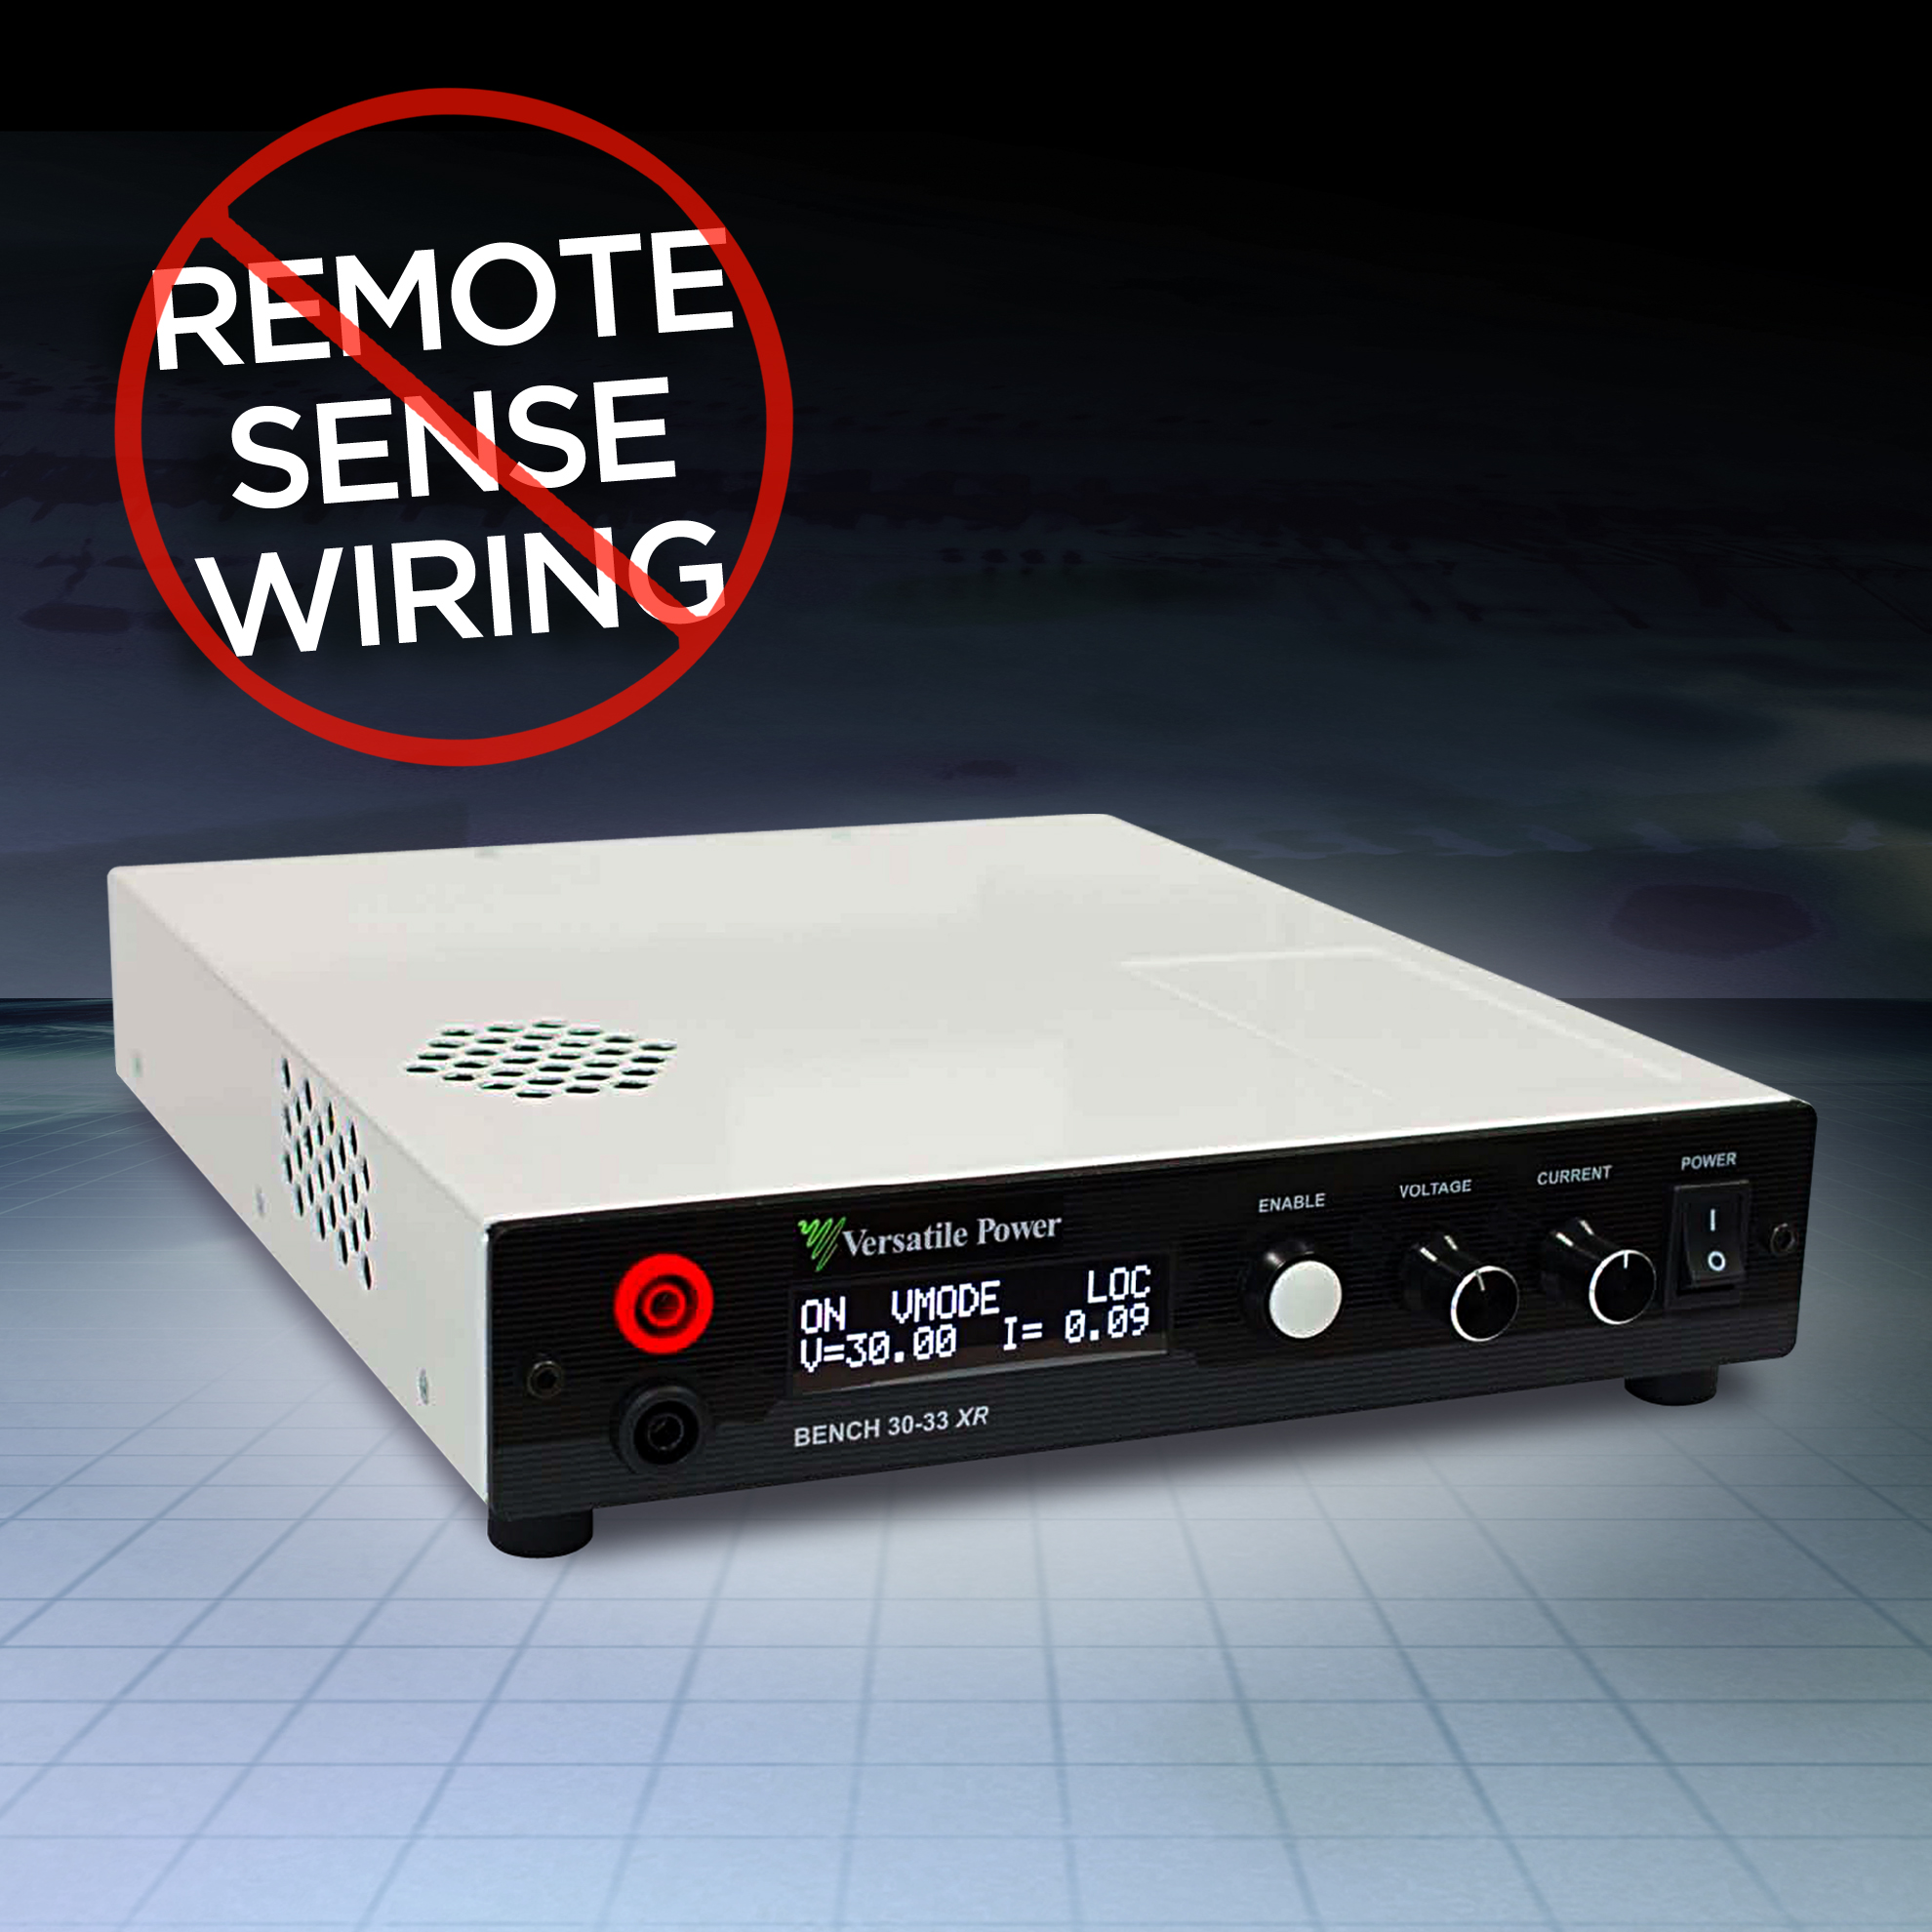 Power Supplies Feature Remote Sense without Wires